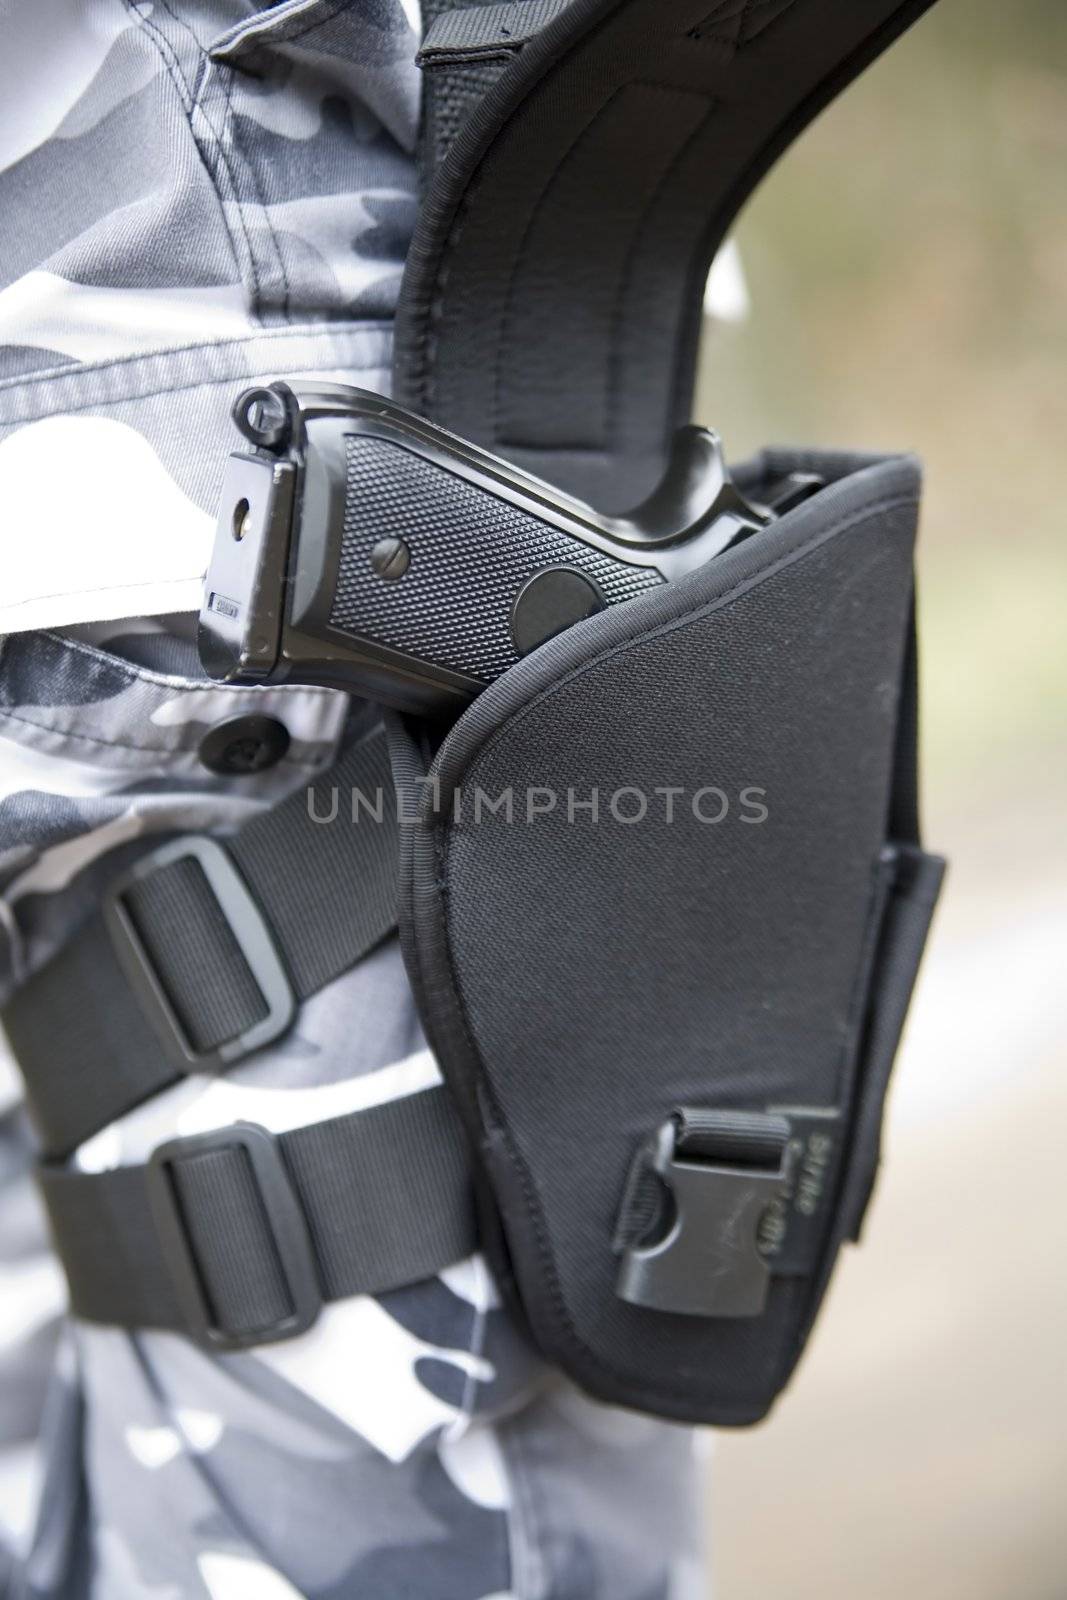 gun holster with a 9mm weapon inside